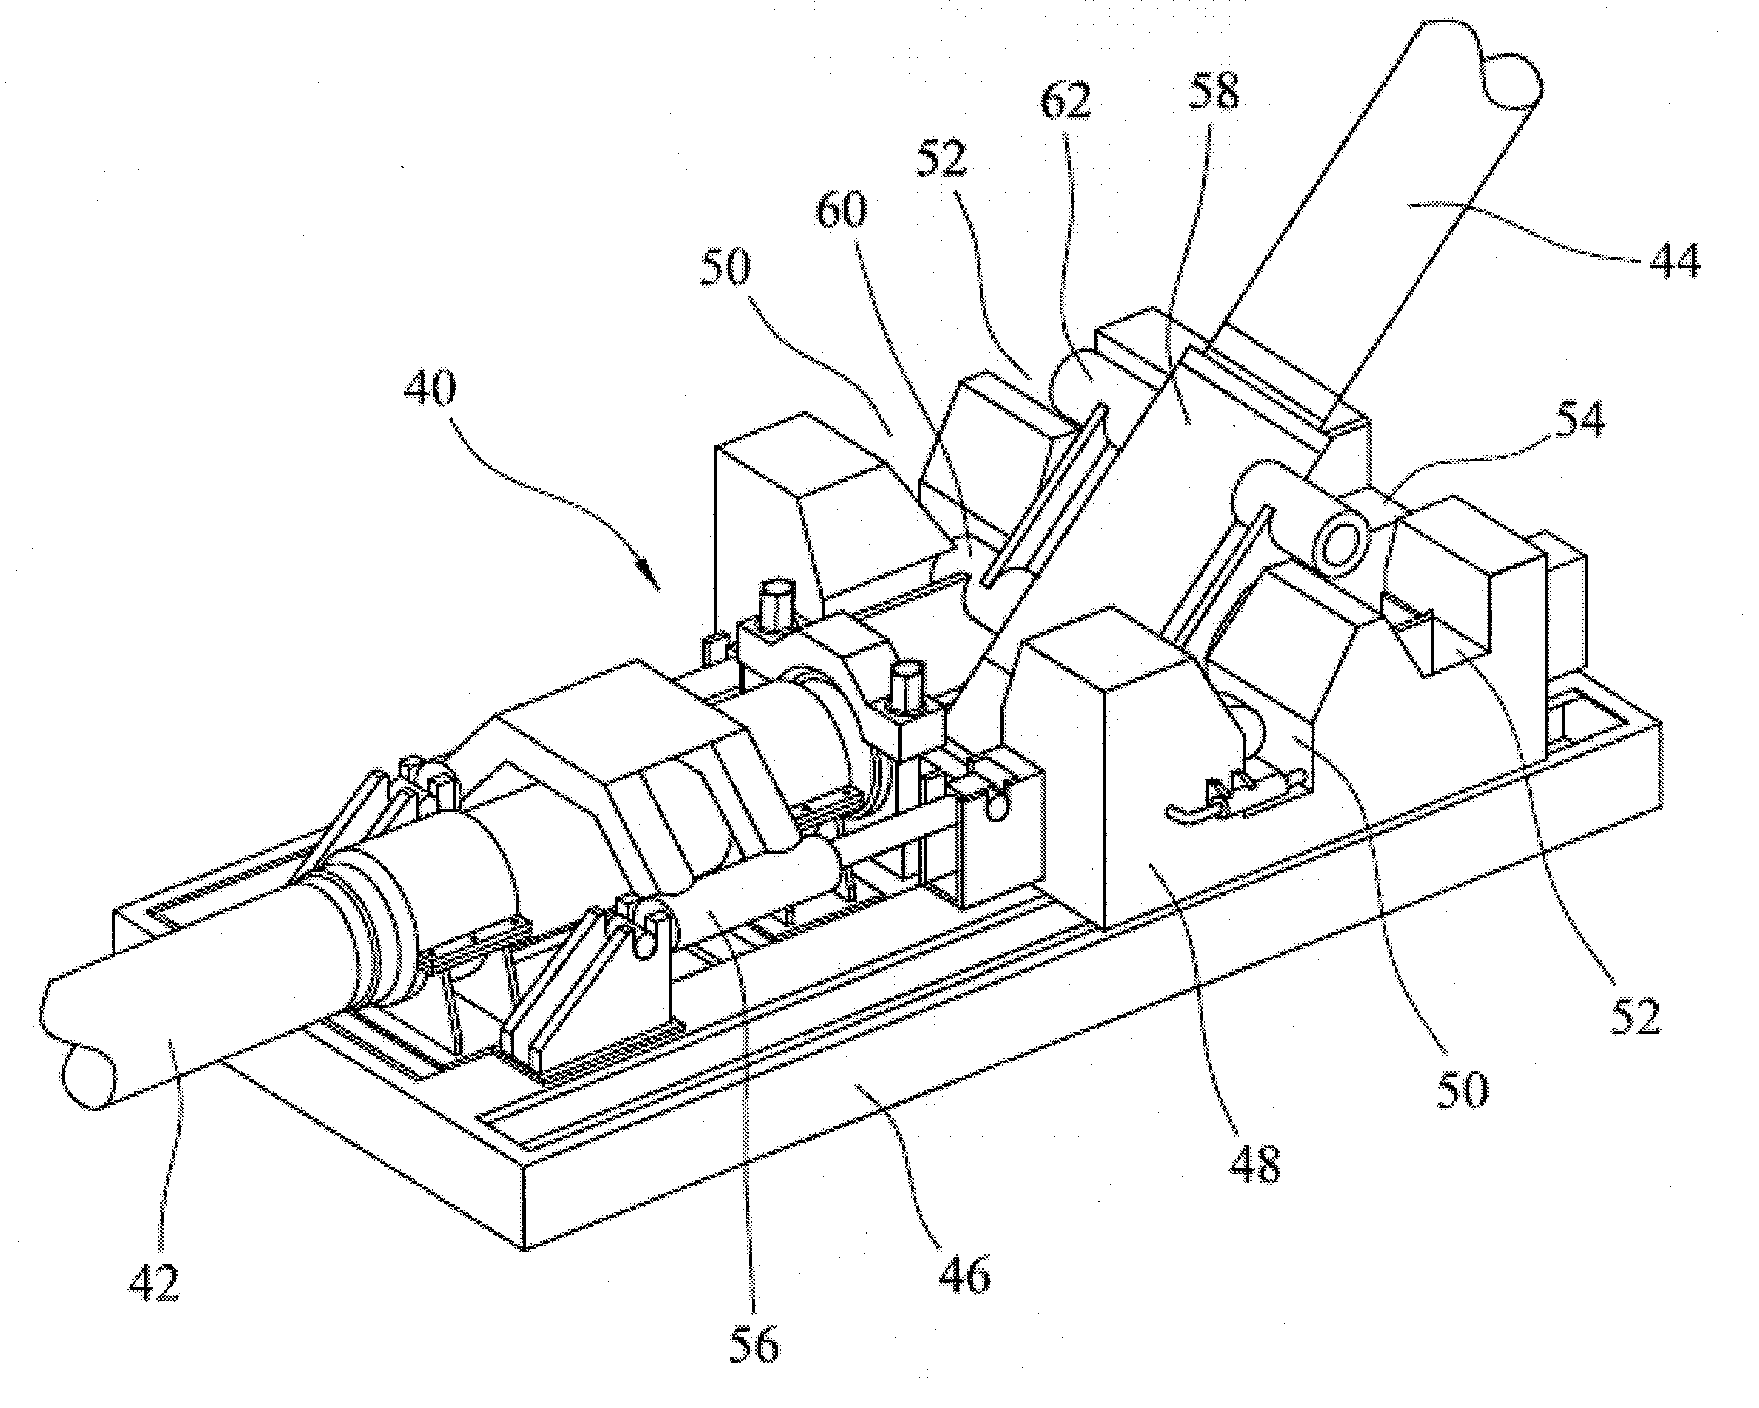 Apparatus and method for the connection of conduits